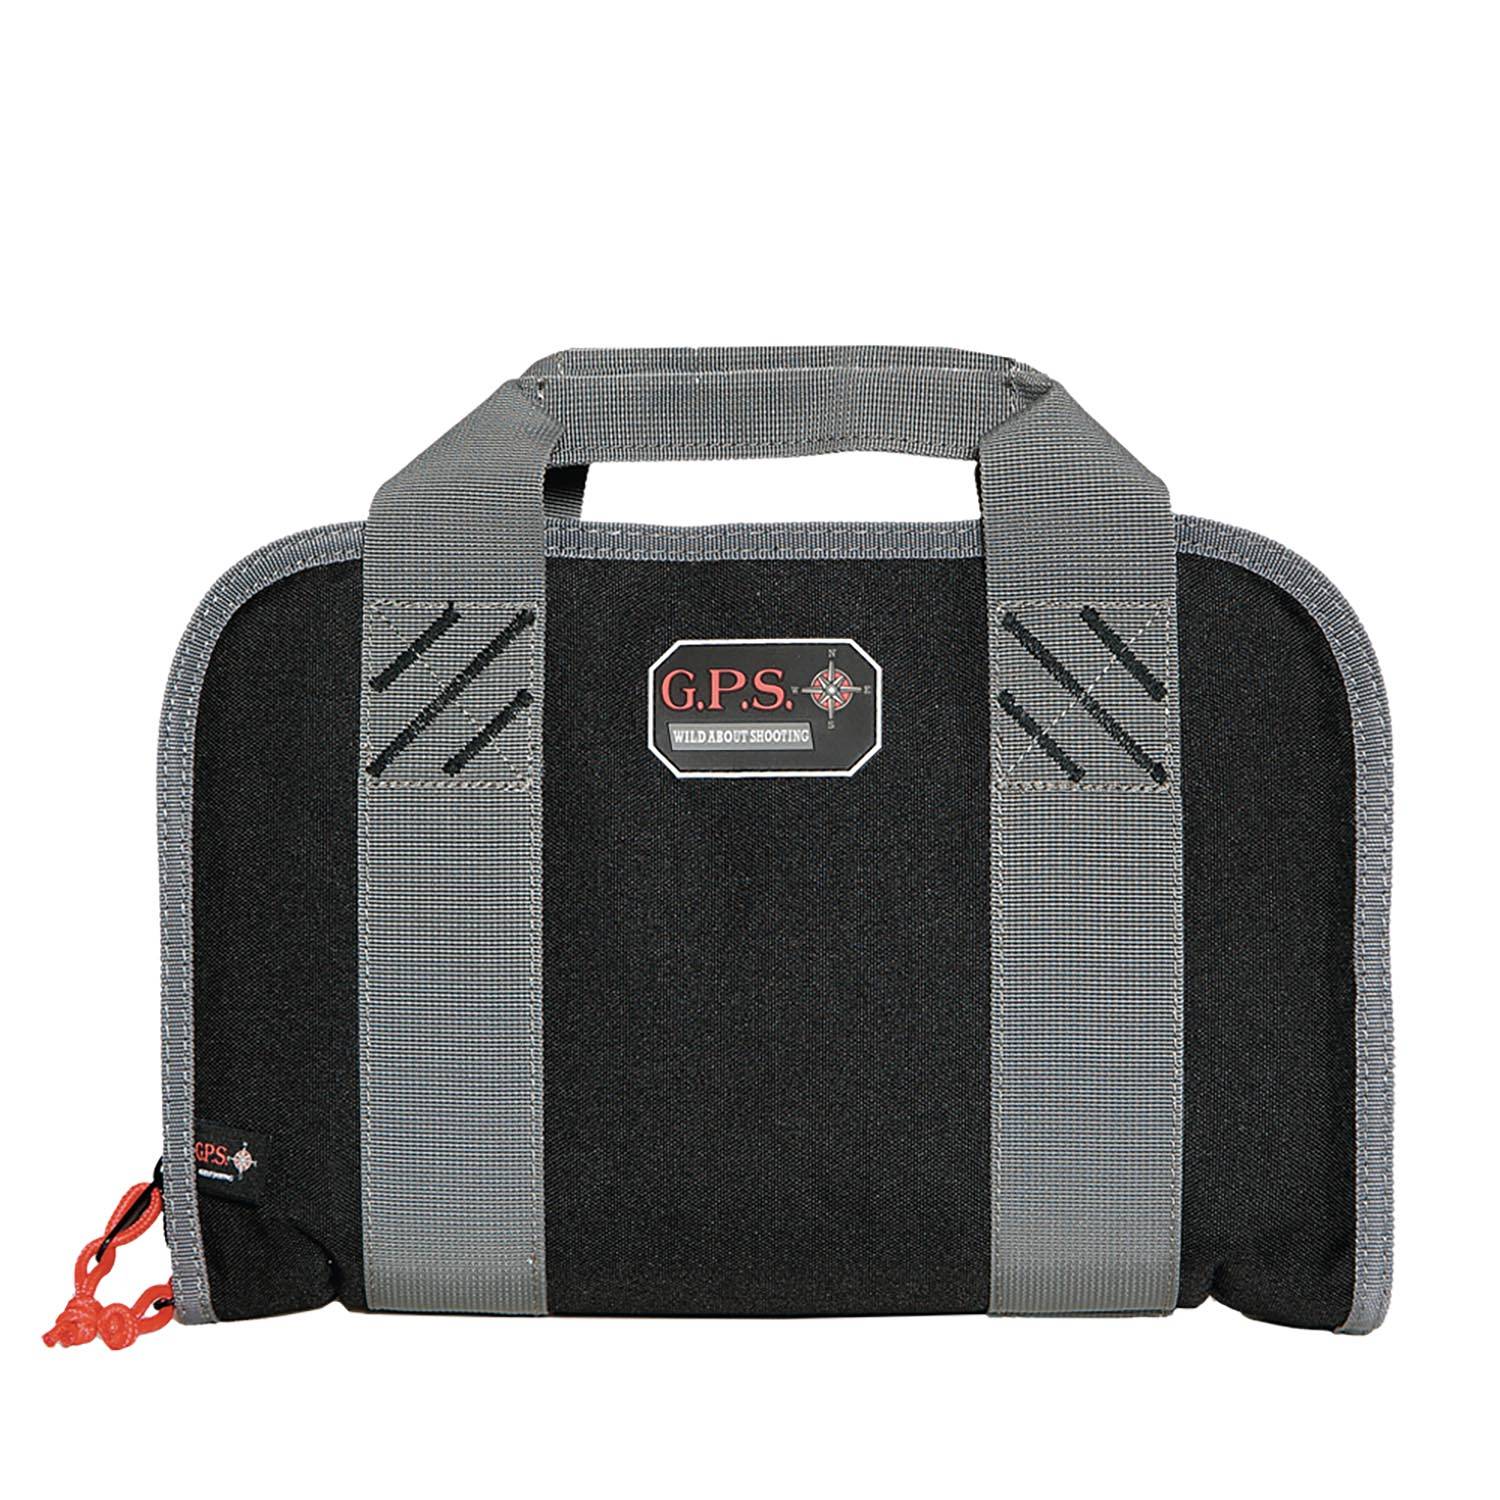 GPS Double Pistol Case with Magazine Storage and Dump Cup